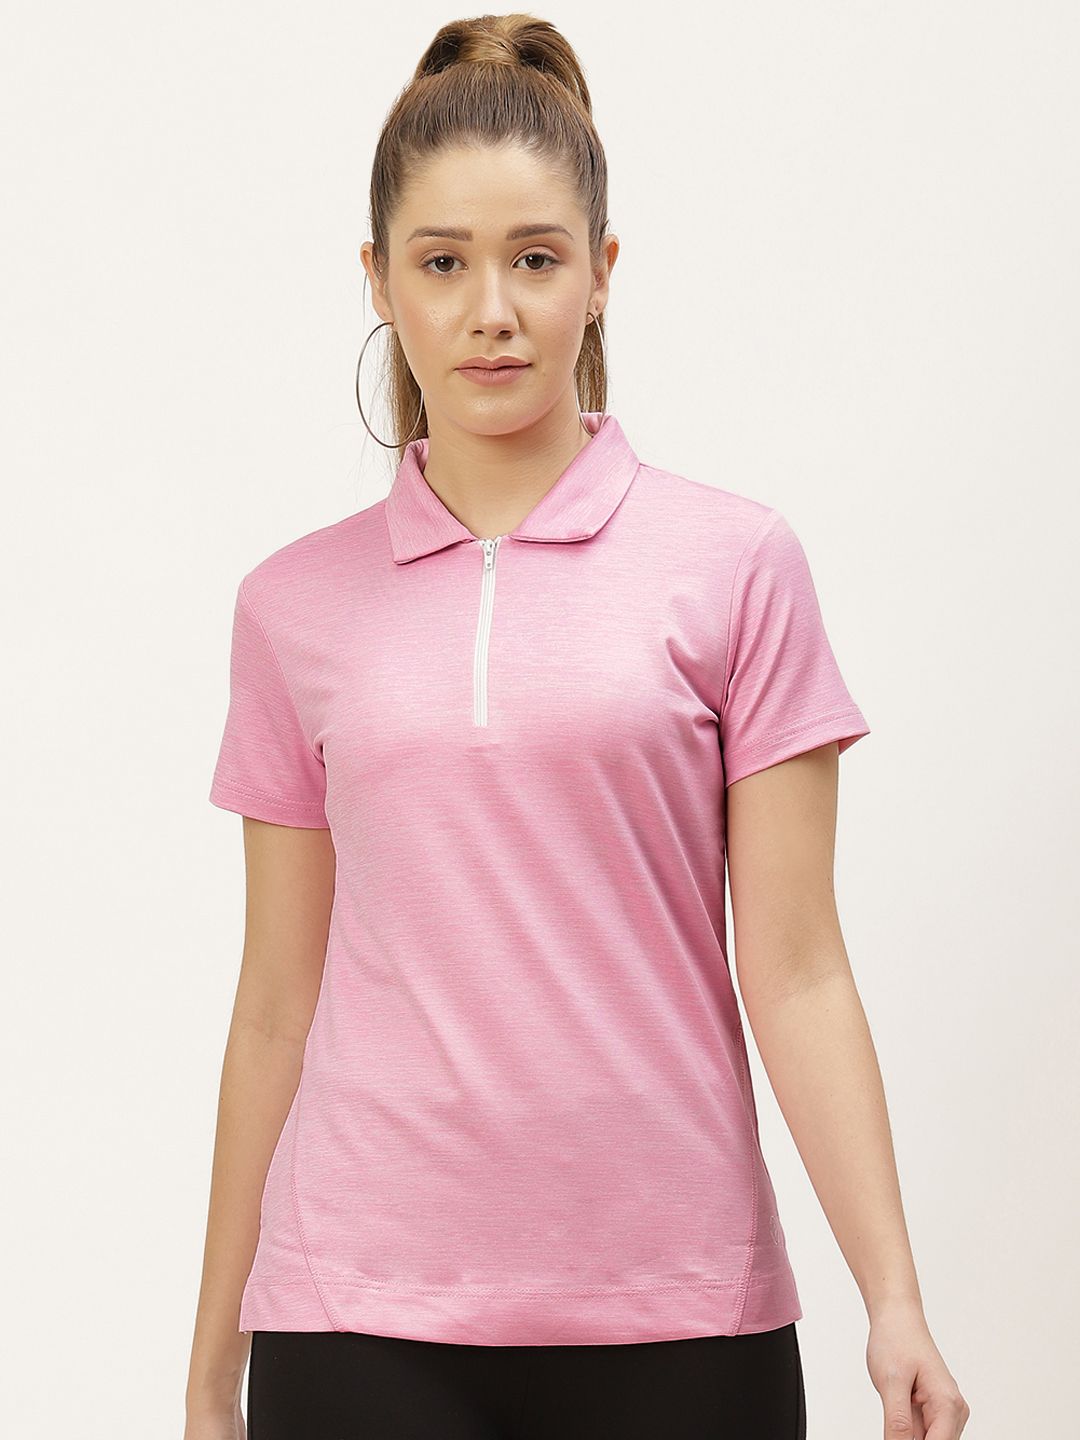 KICA Women Pink Solid Polo Collar Dry-Fit Outdoor T-shirt Price in India